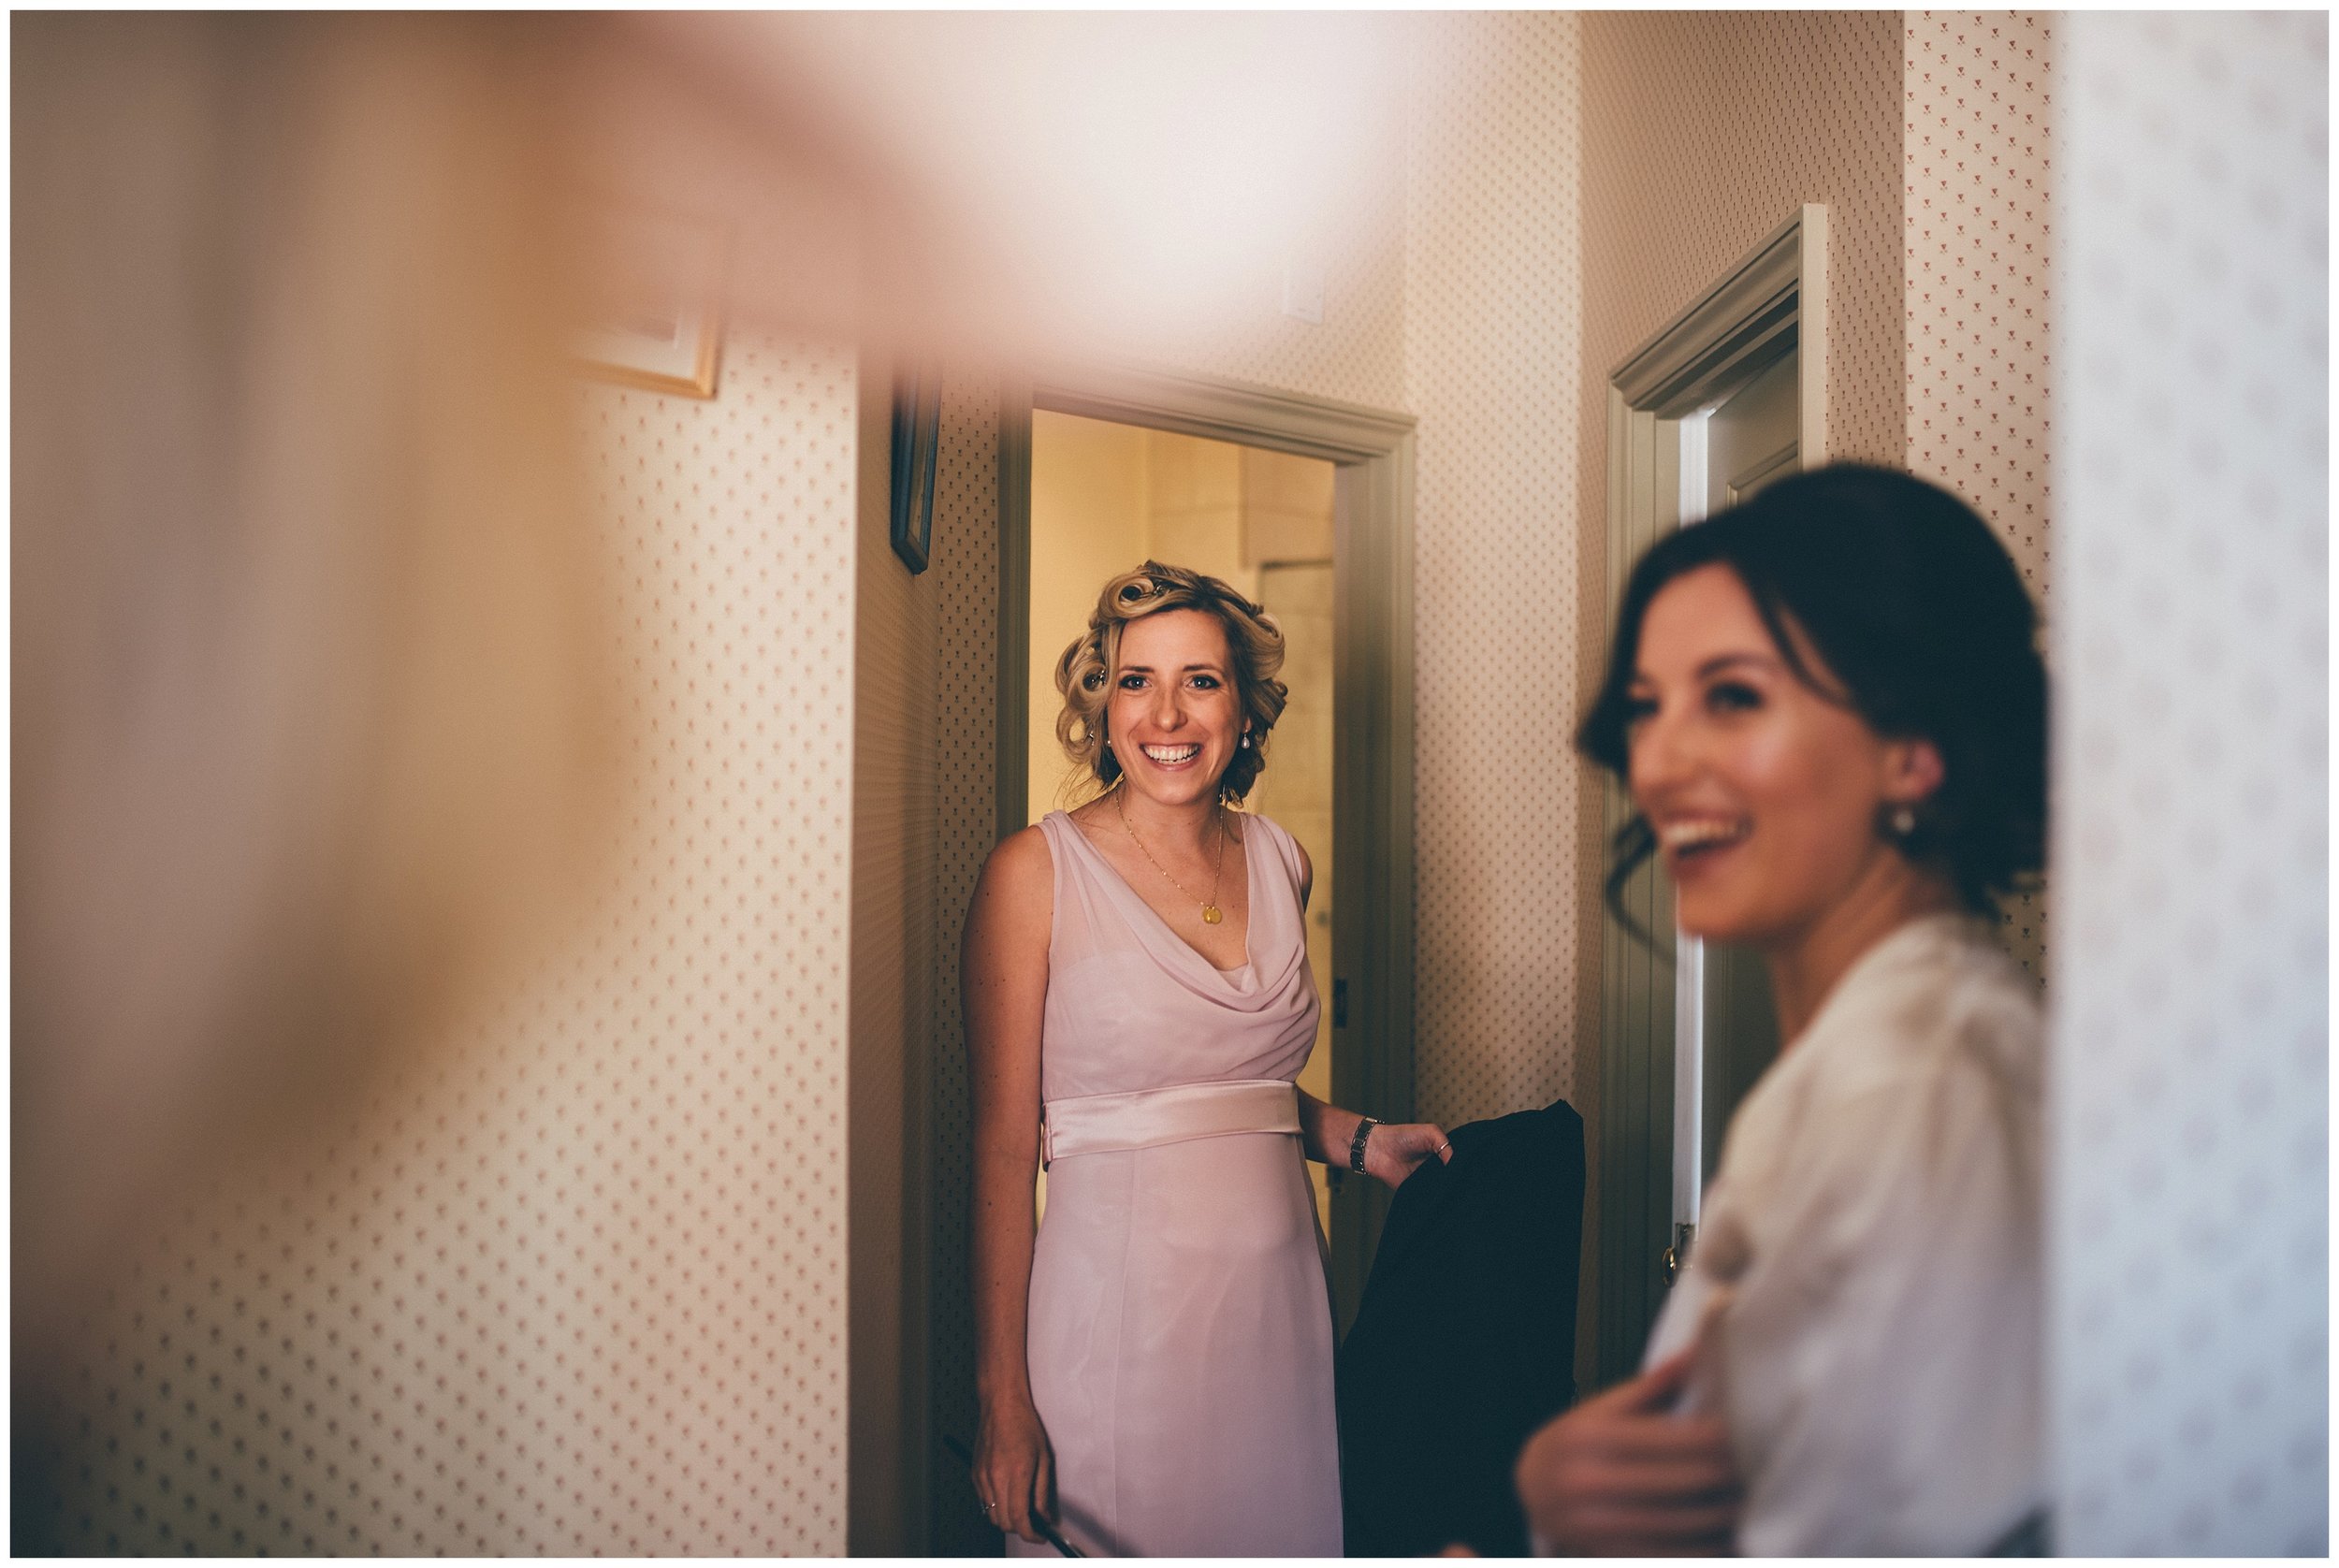 Bridesmaids dressed in dusky pink smile at the mother of the bride.